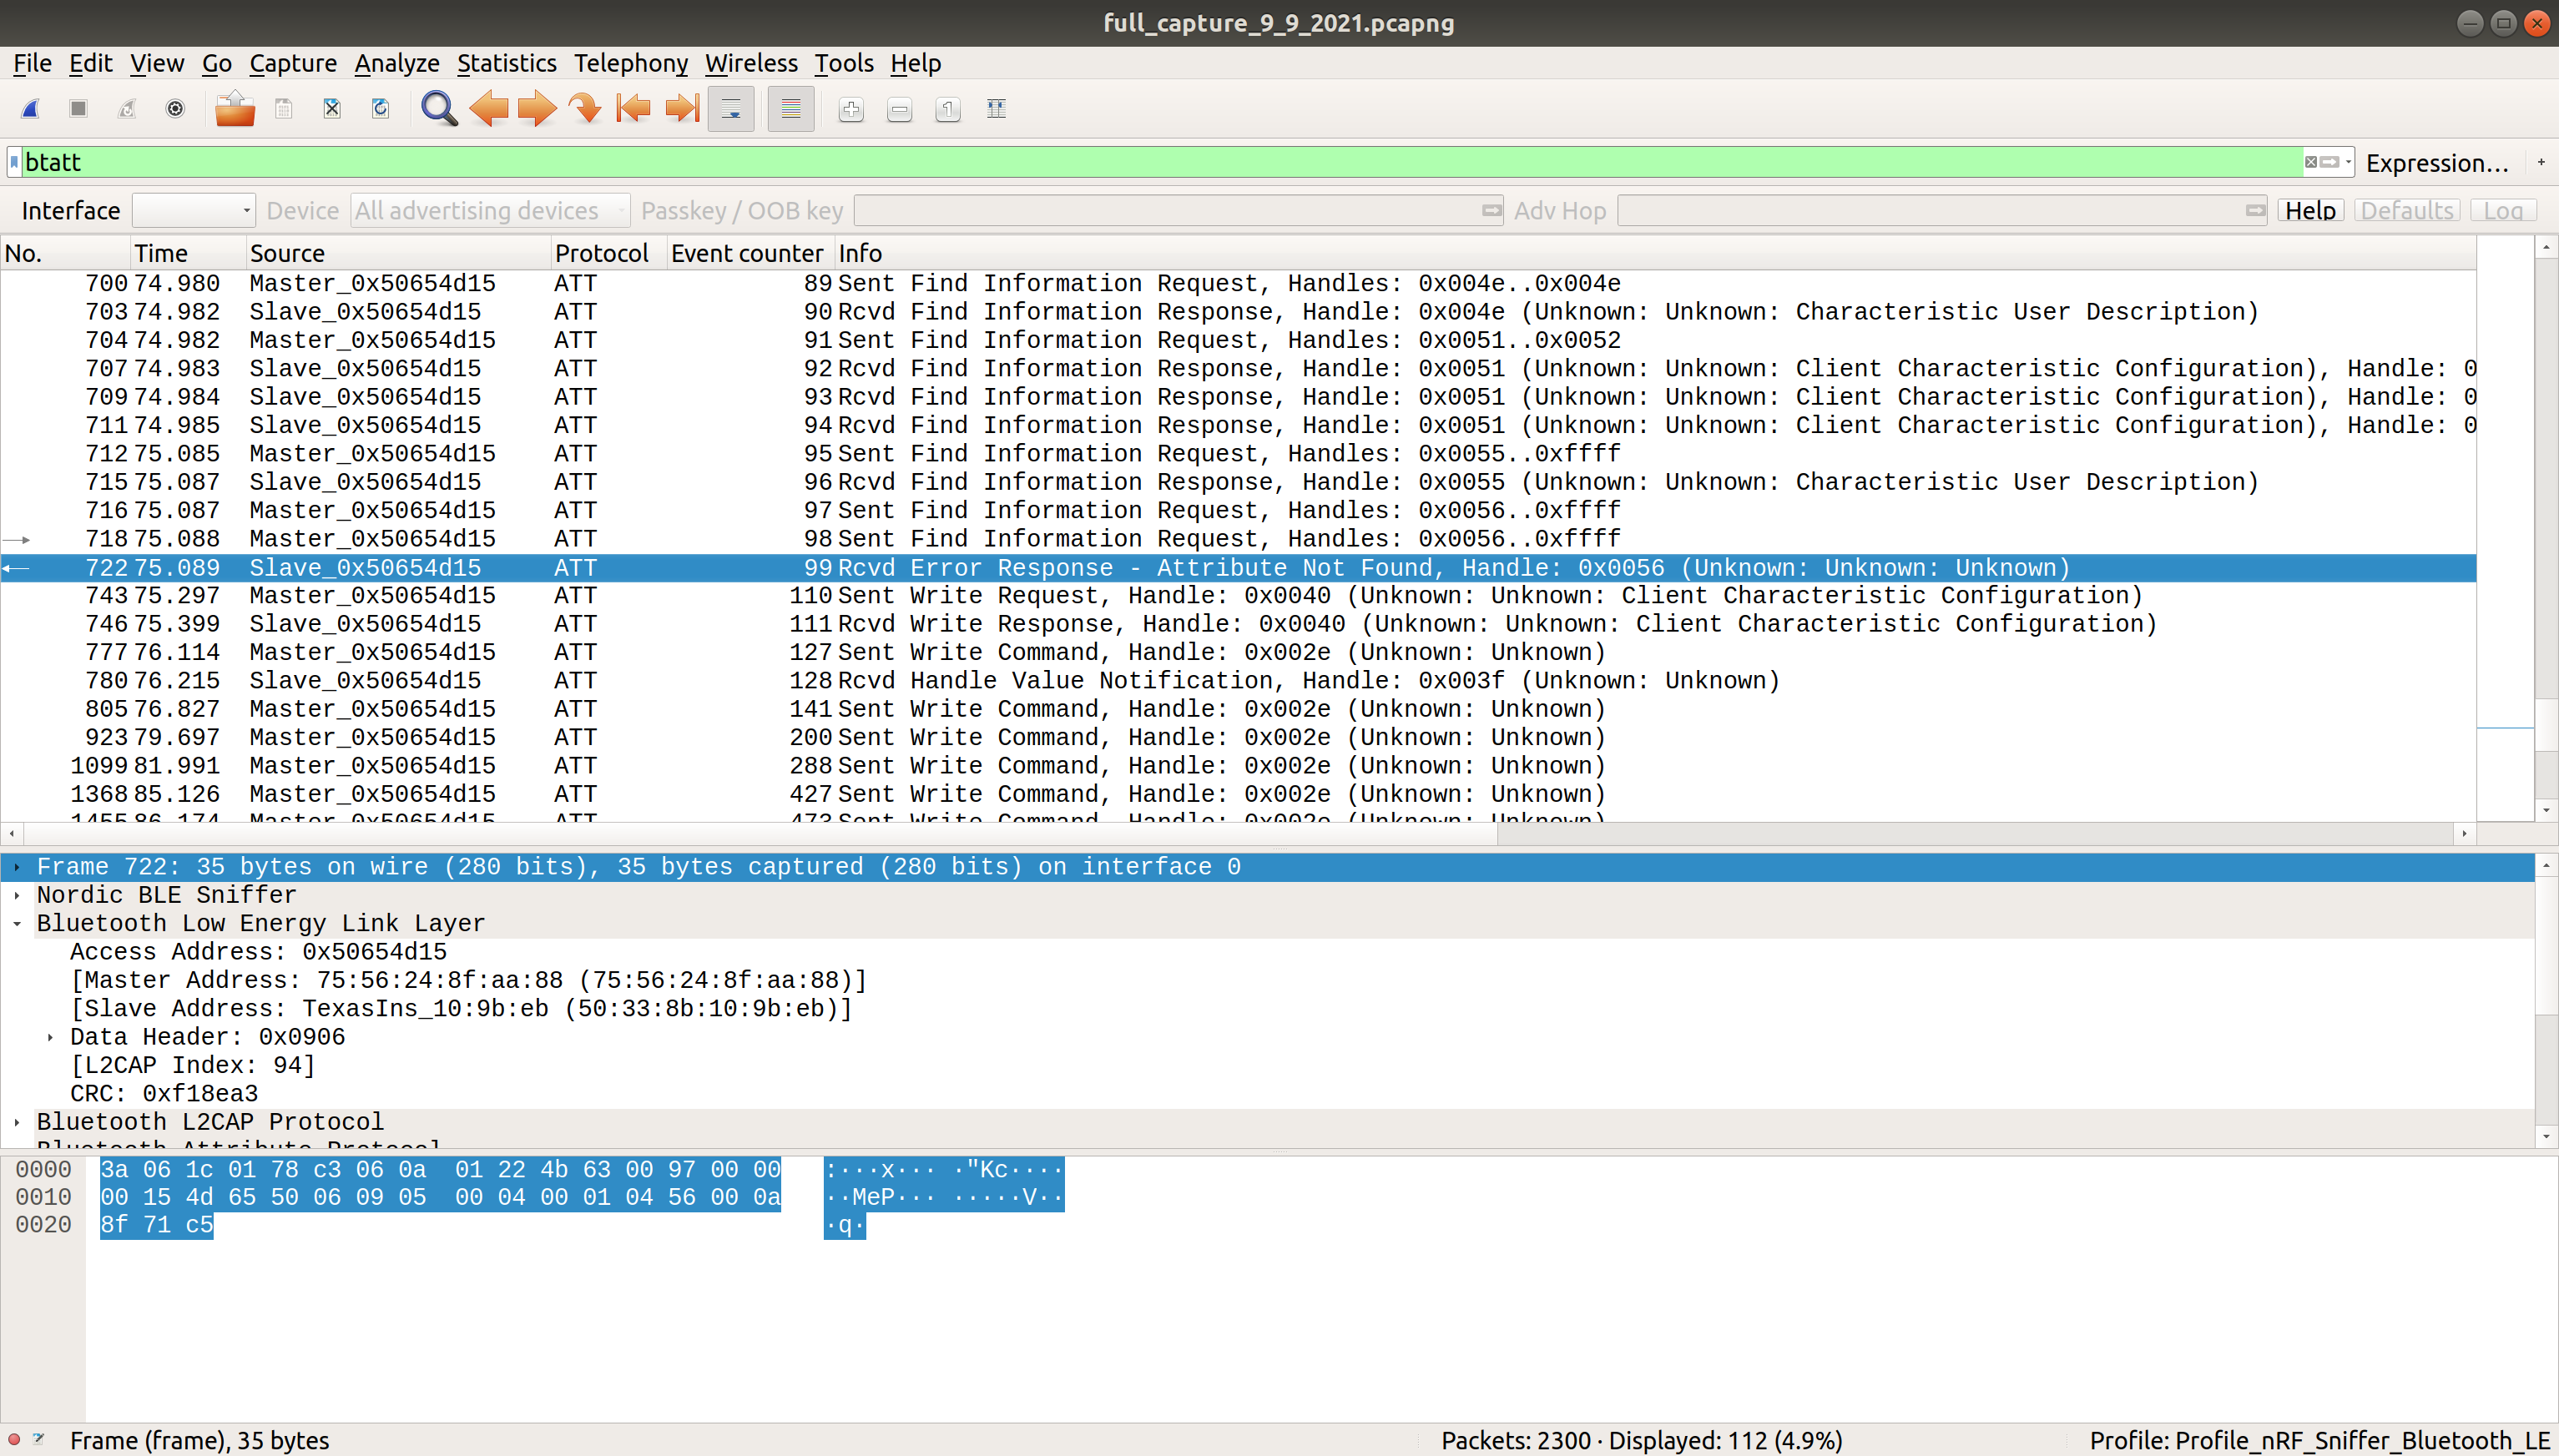 Screenshot of wireshark displaying packets after they've been filtered by the btatt filter. There are multiple "Find information request" lines in the info column, as well as "Sent Write Command"